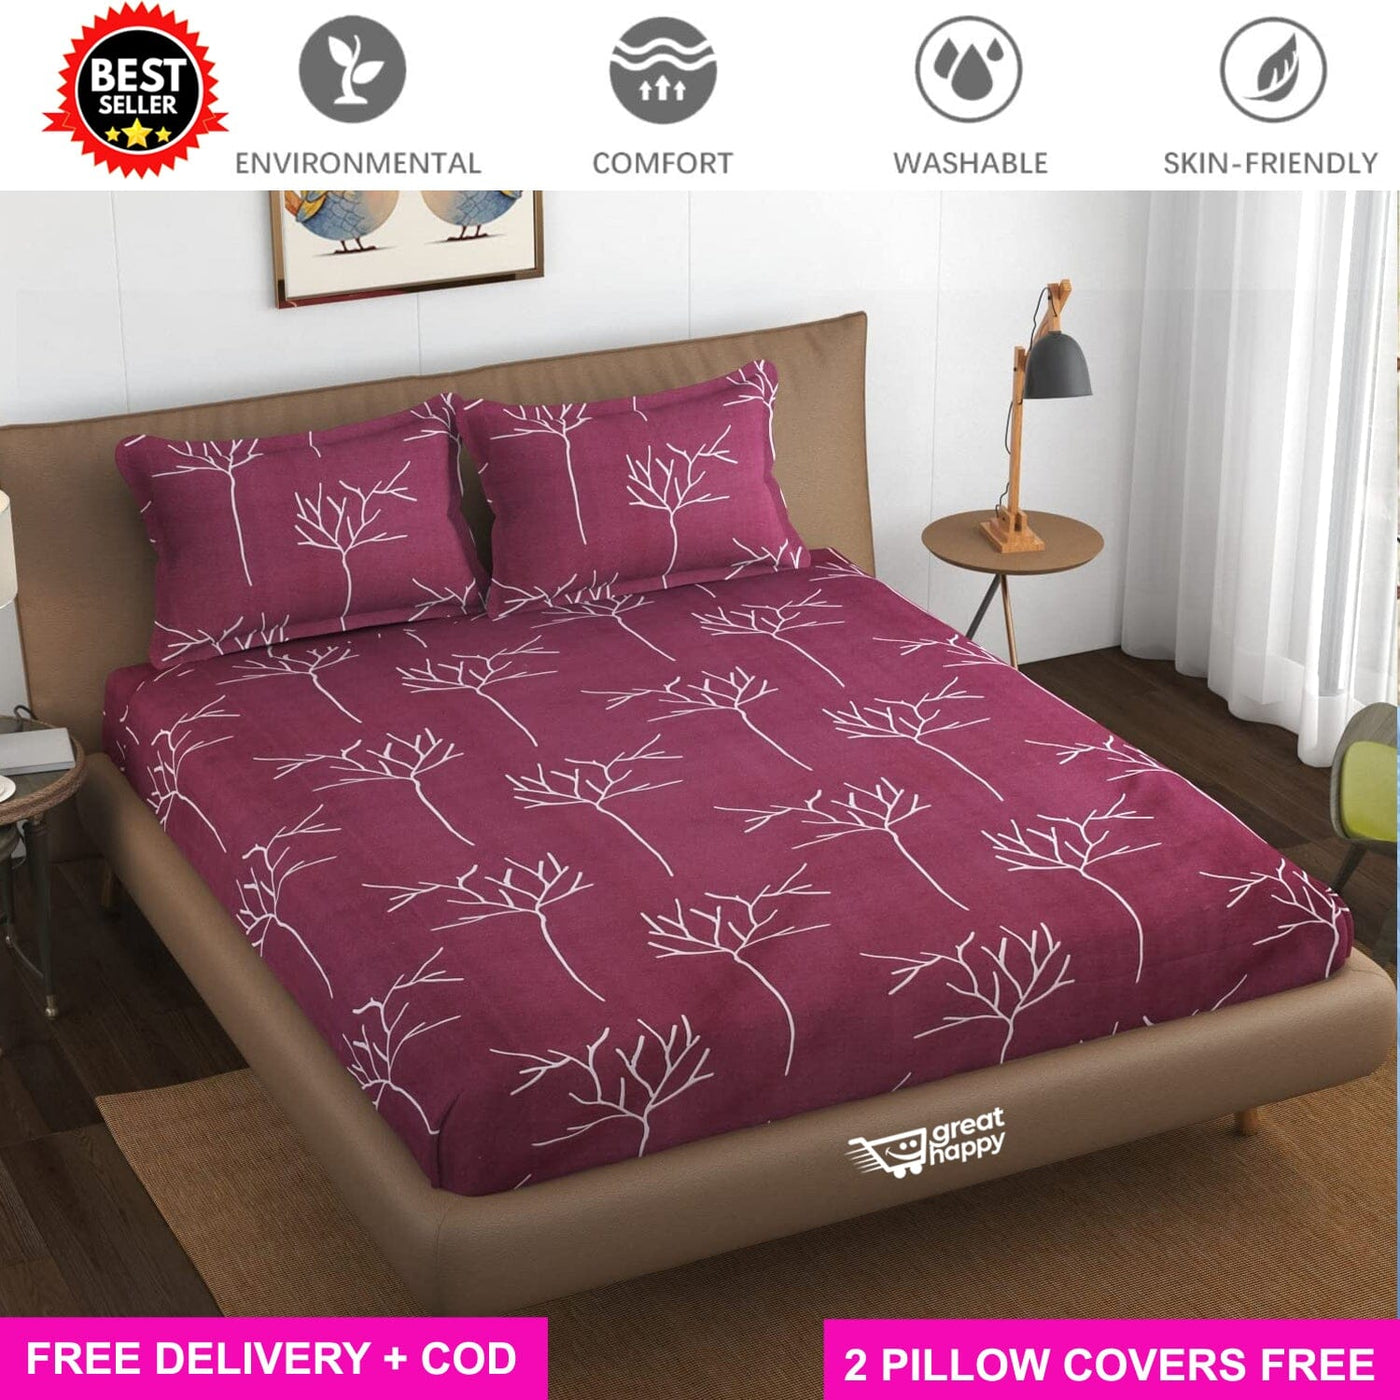 Cotton Elastic Fitted Bedsheet with 2 Pillow Covers - Fits with any Beds & Mattresses Great Happy IN Maroon Tree QUEEN SIZE 